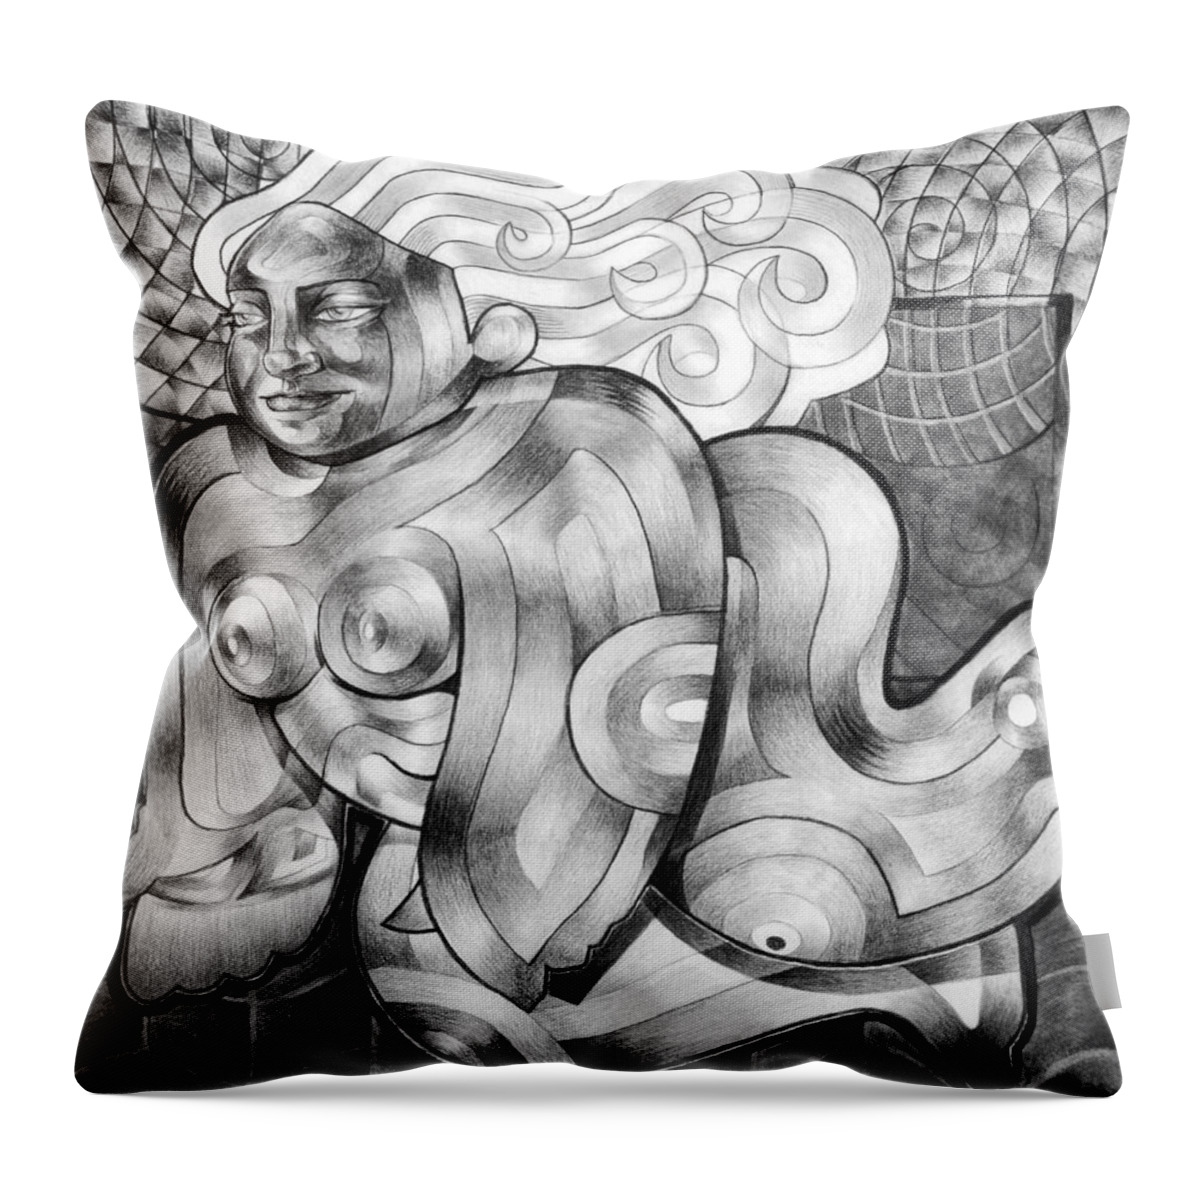 Art Throw Pillow featuring the drawing Floating by Myron Belfast